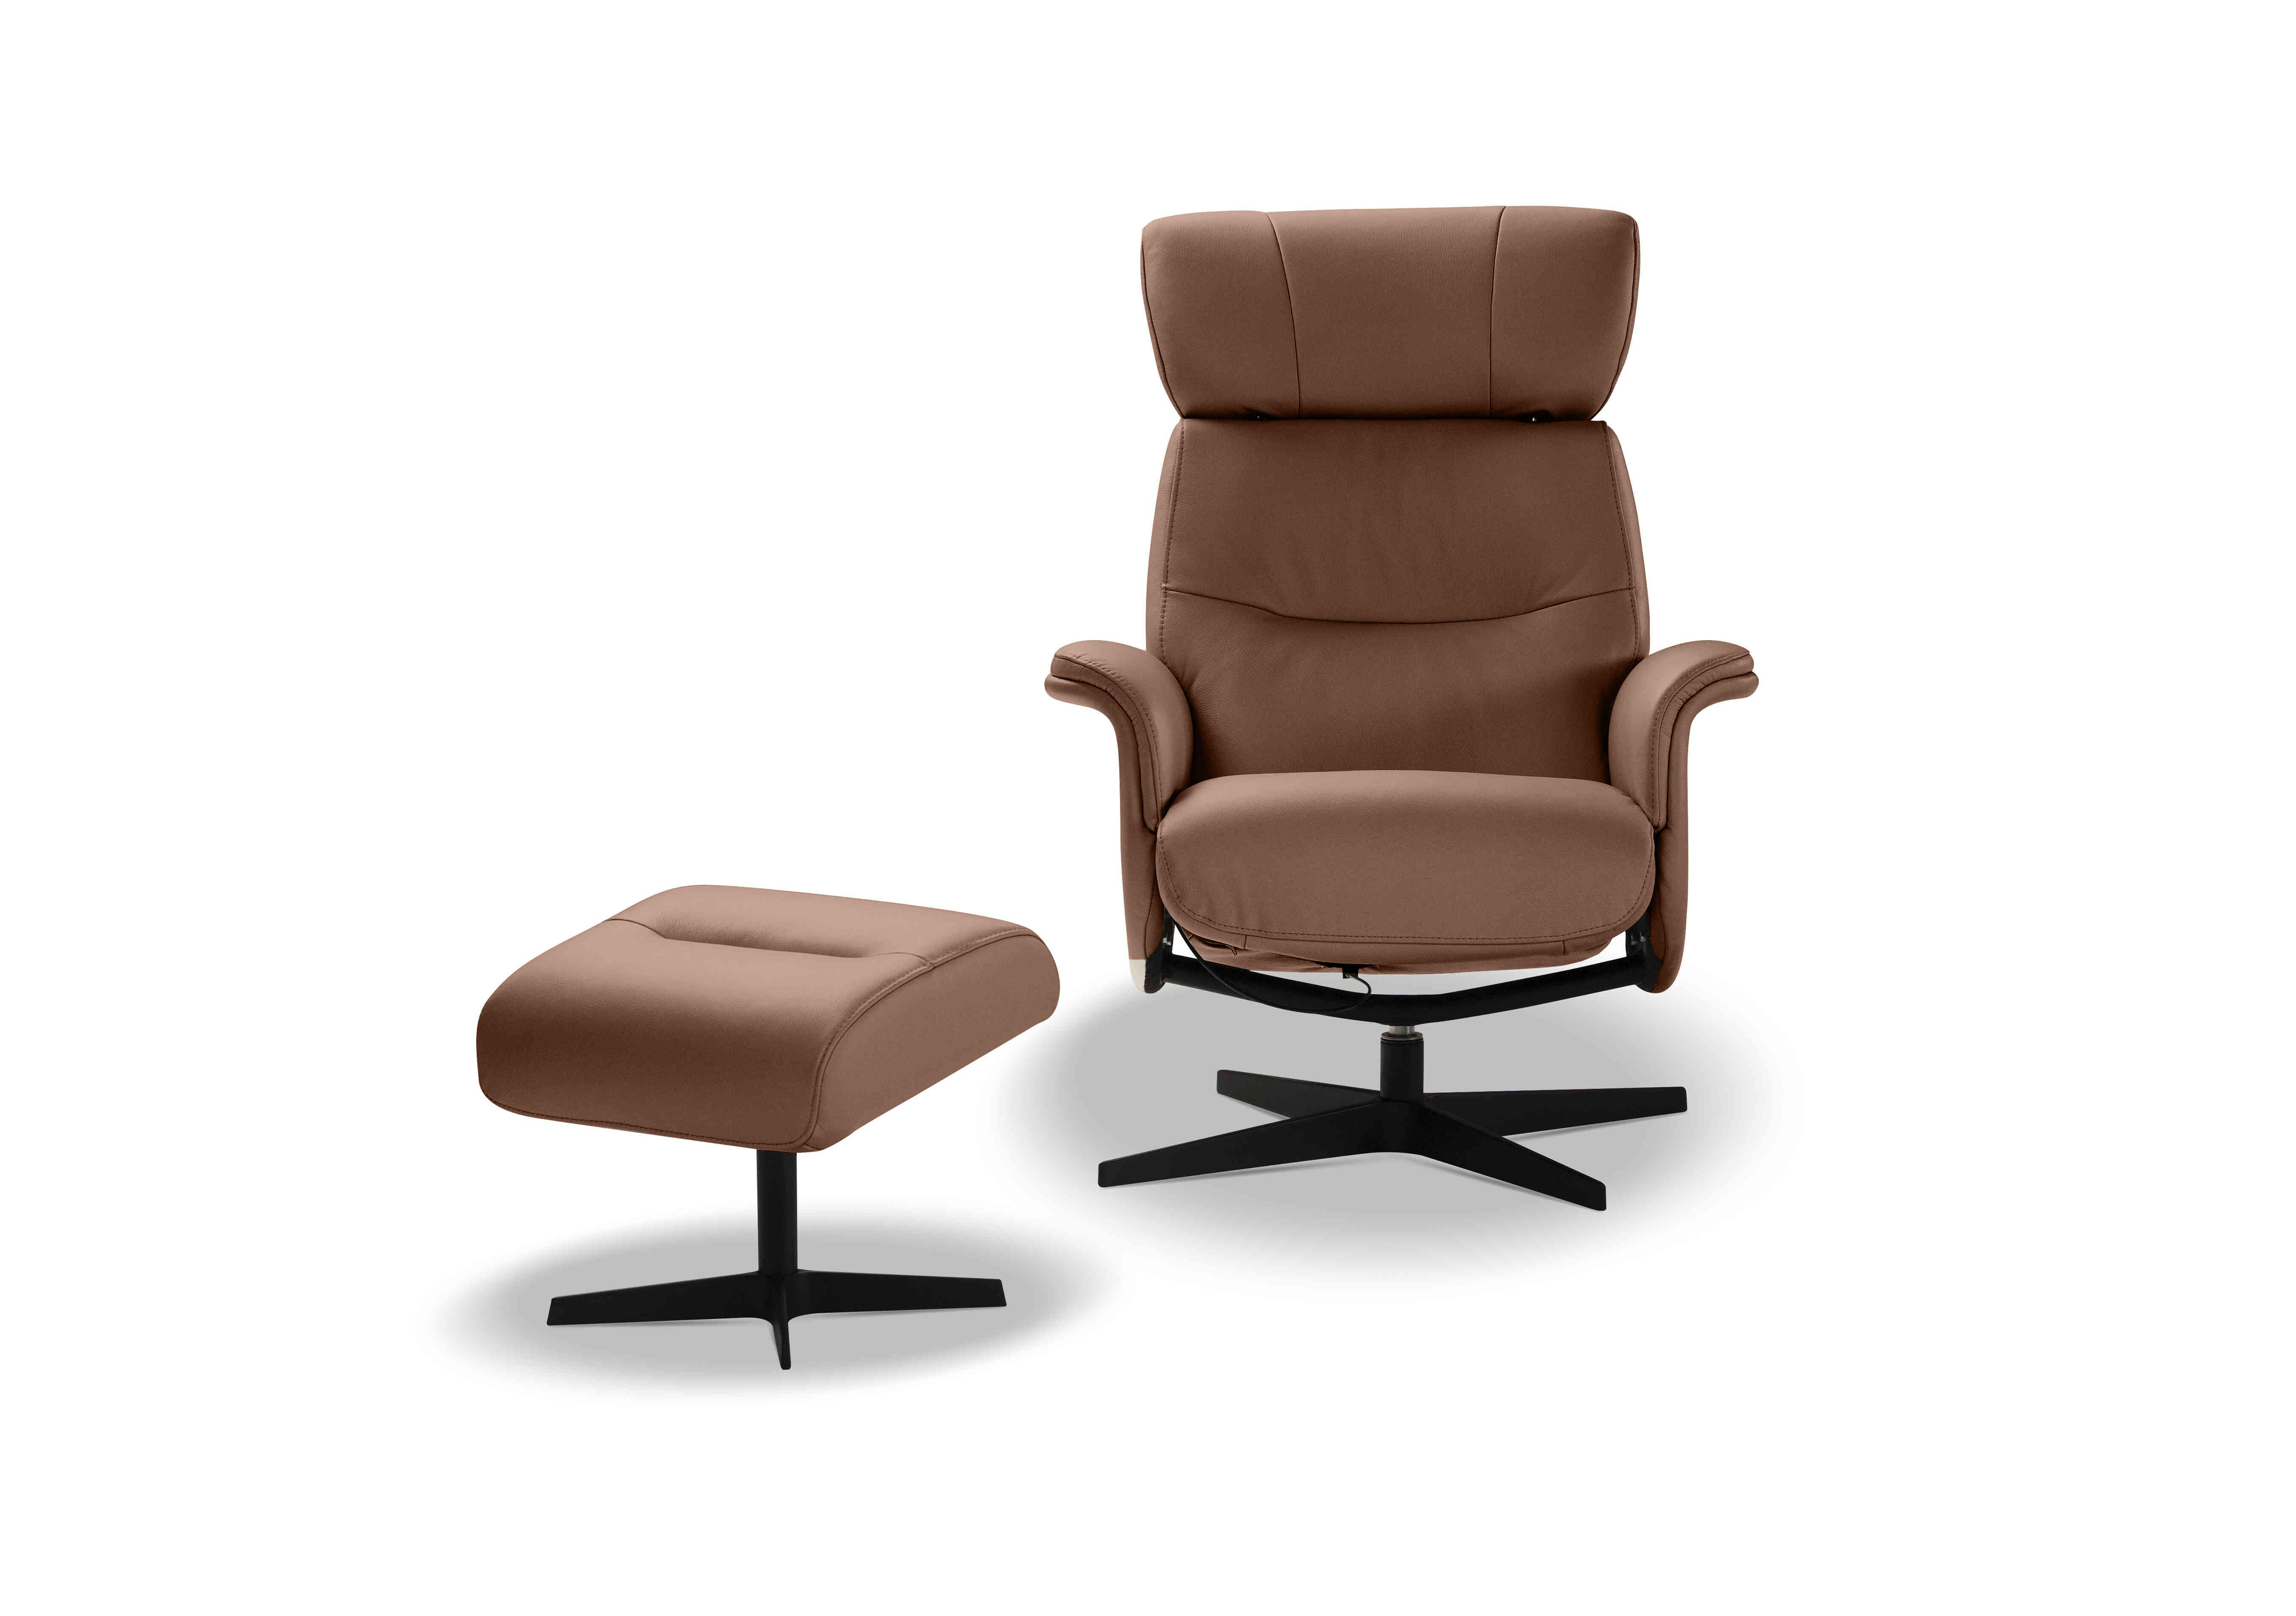 Tricolour Enzo Leather Swivel Manual Recliner Chair and Stool in Torello 363 Cognac An Ft on Furniture Village